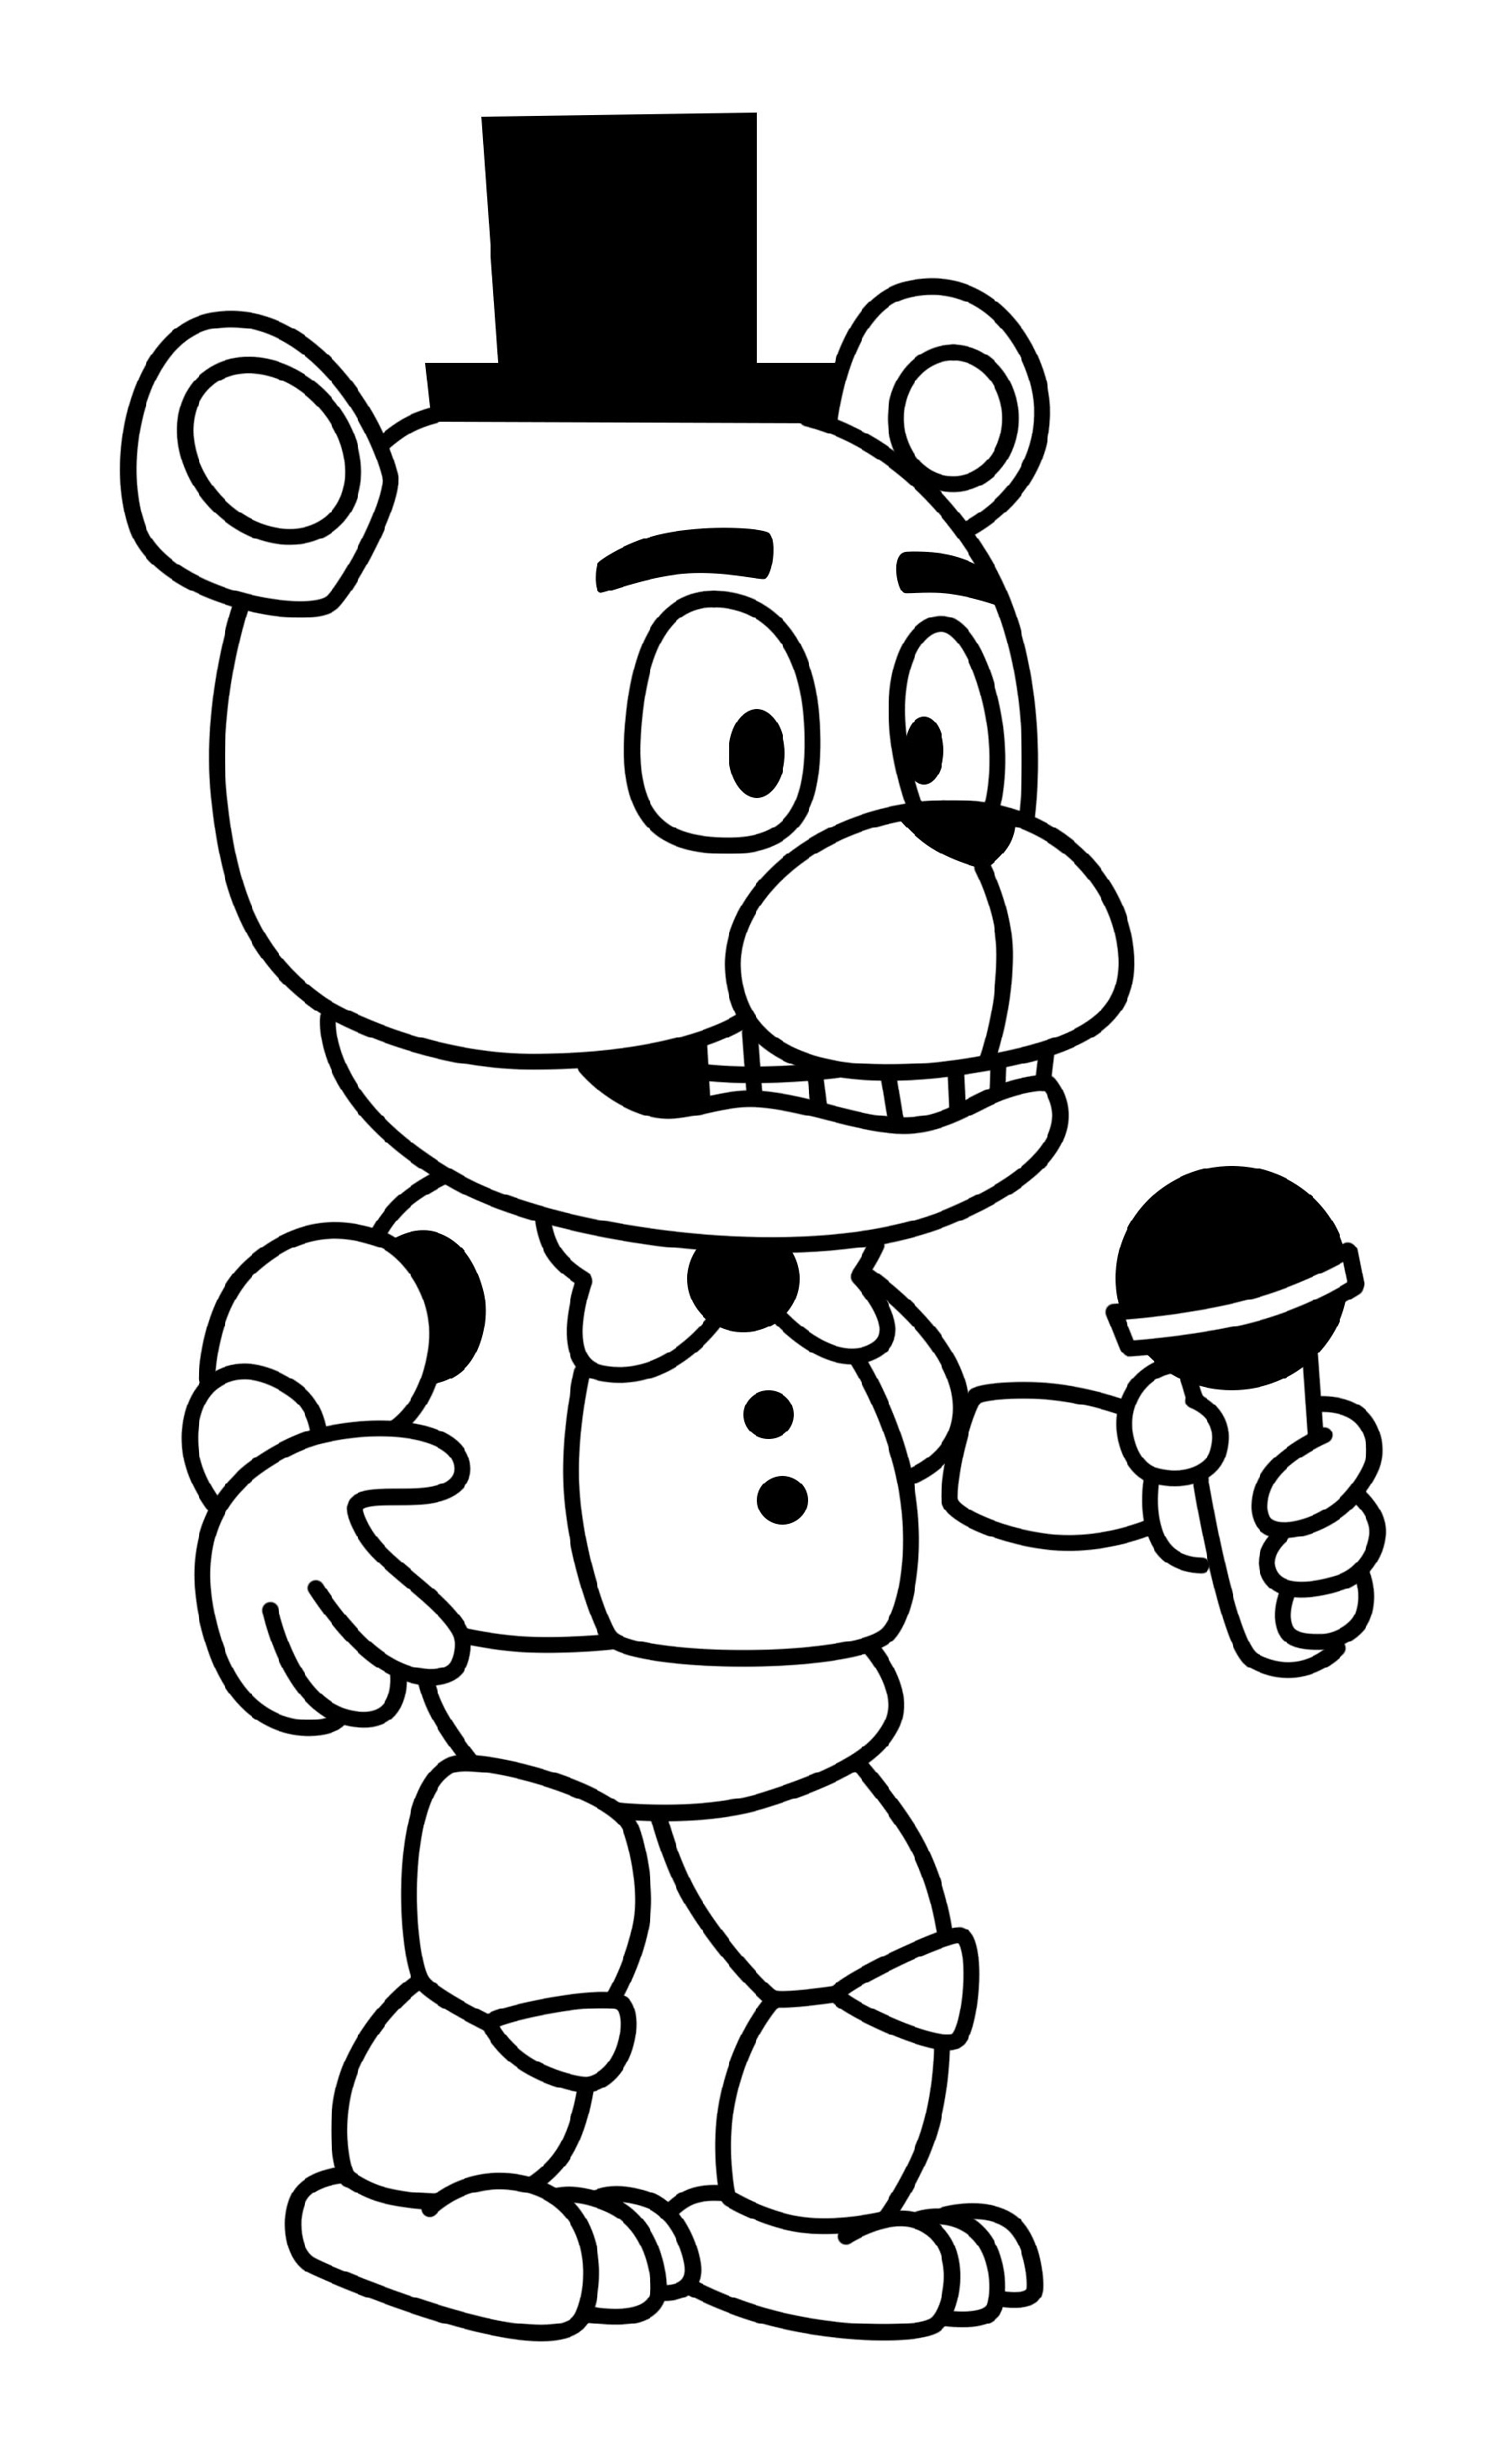 FNAF Coloring Pages to Print 101 Coloring